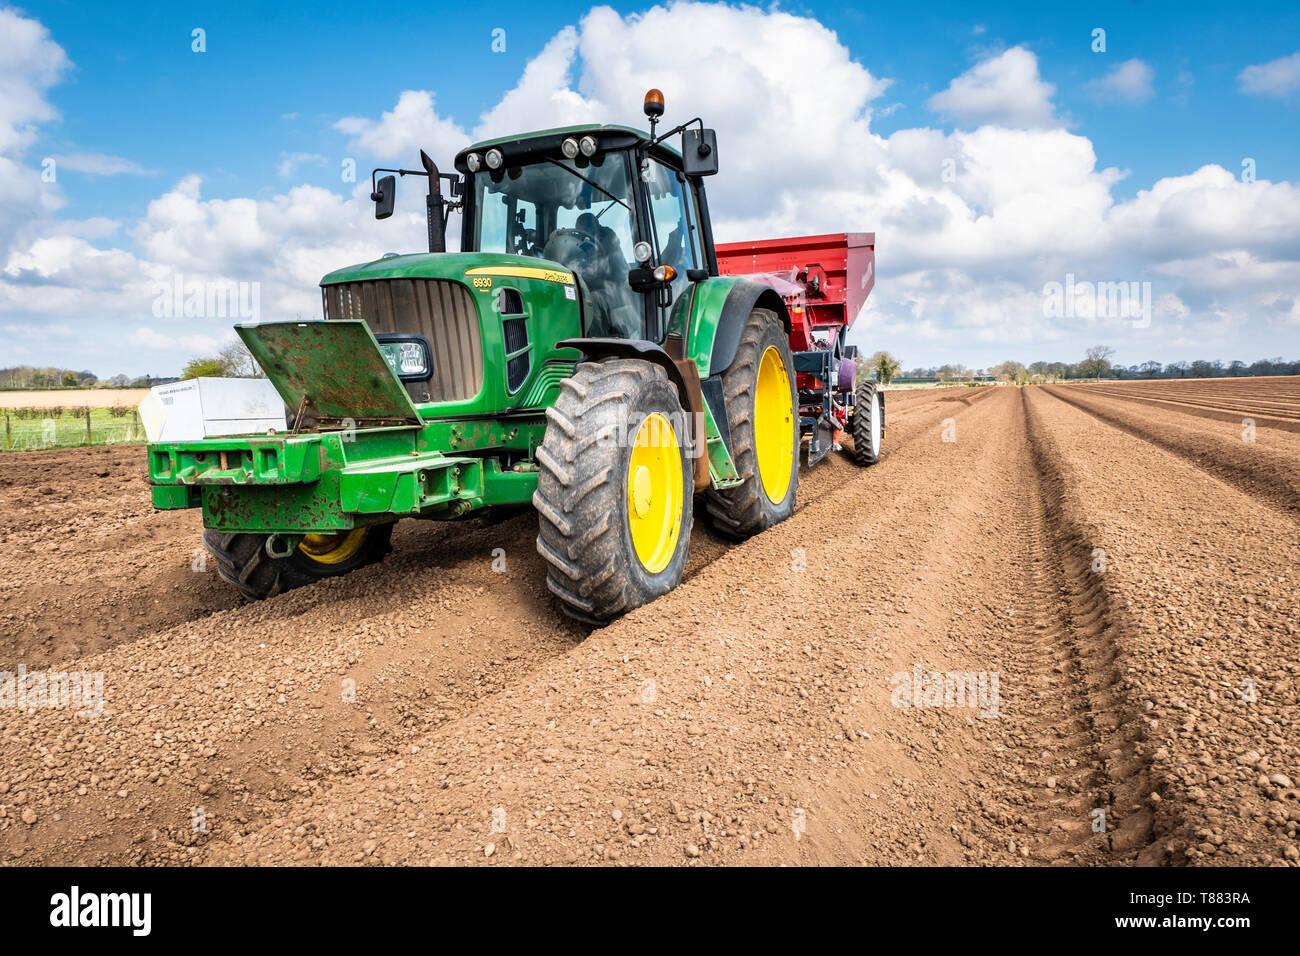 Mechanised planting of seed potatoes using a dewulf 3 row belt planter behind a John Deere tractor. Stock Photo